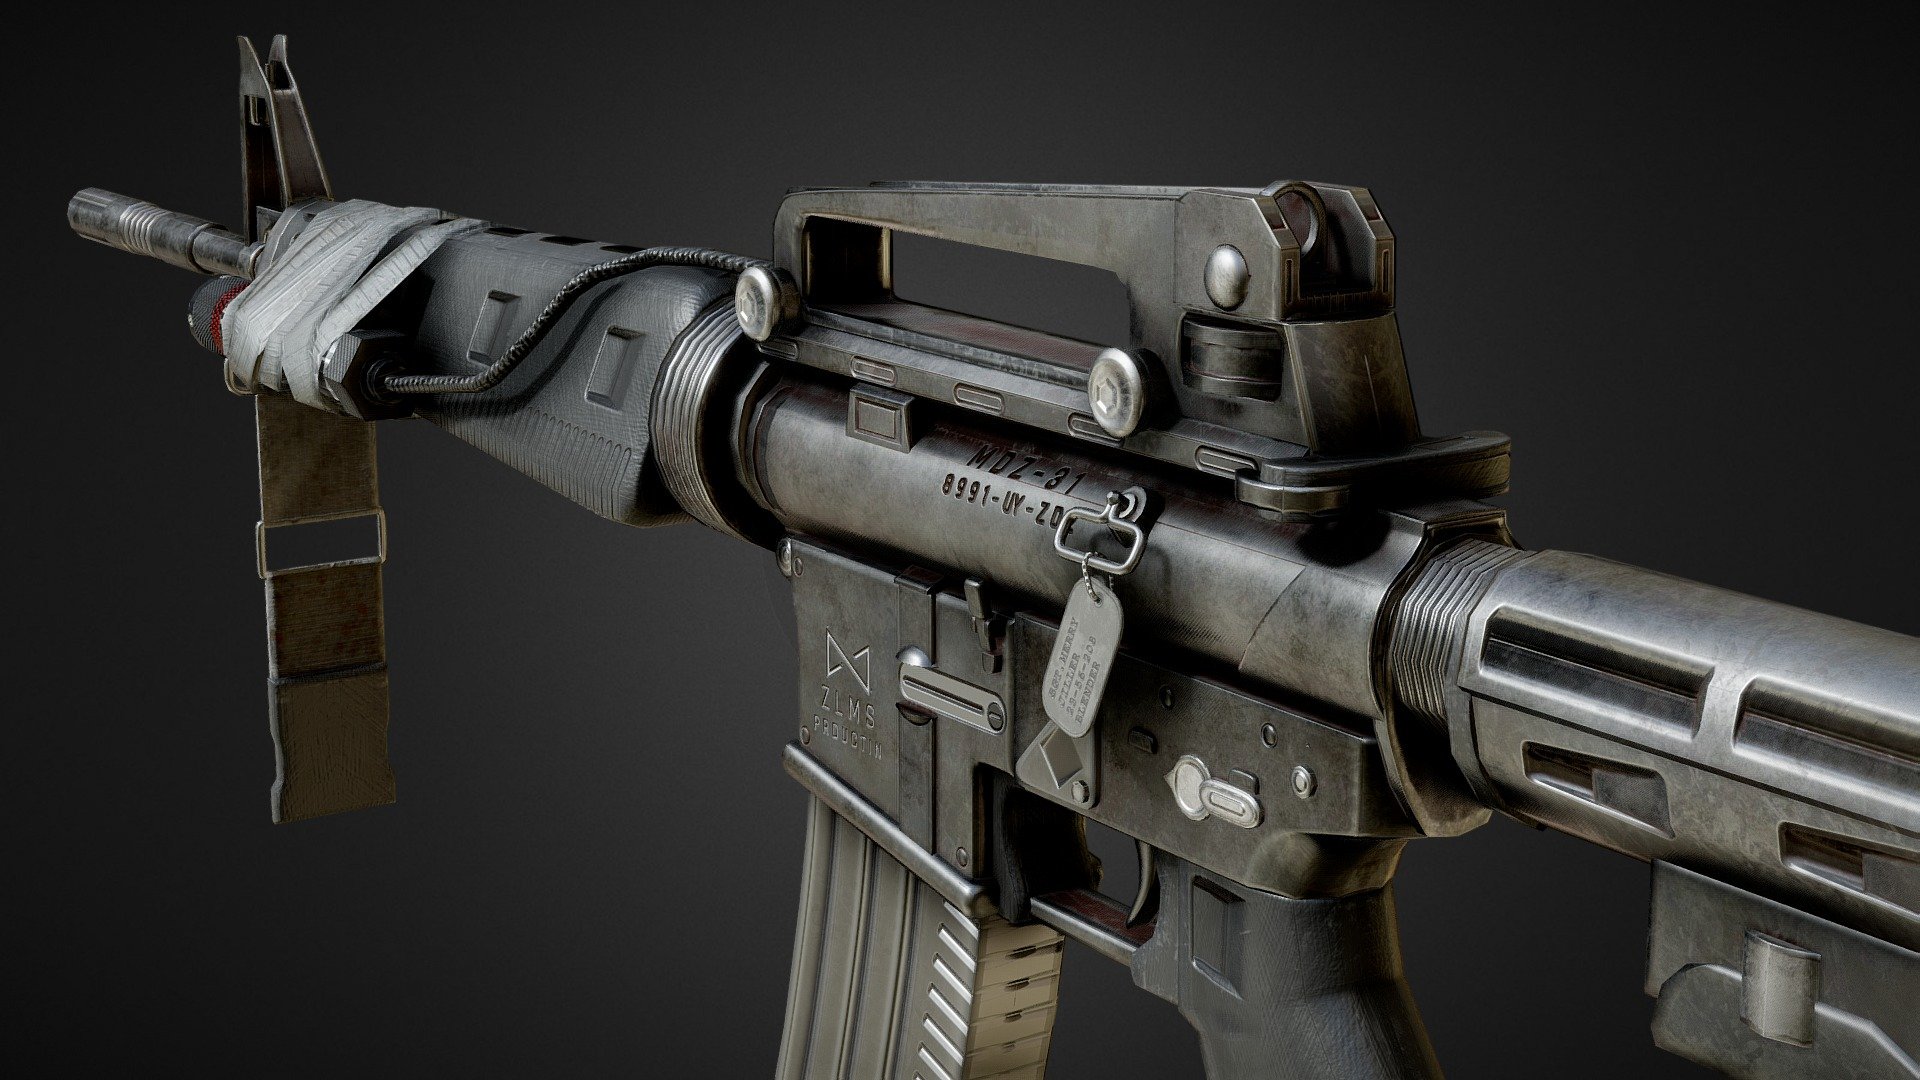 one of my older models that I never got to release, game ready with 4k textures, has some mirrored UV issues and duct tape isnt best looking, other than that an ok model - M16A4 - Buy Royalty Free 3D model by RavenTale_CG 3d model